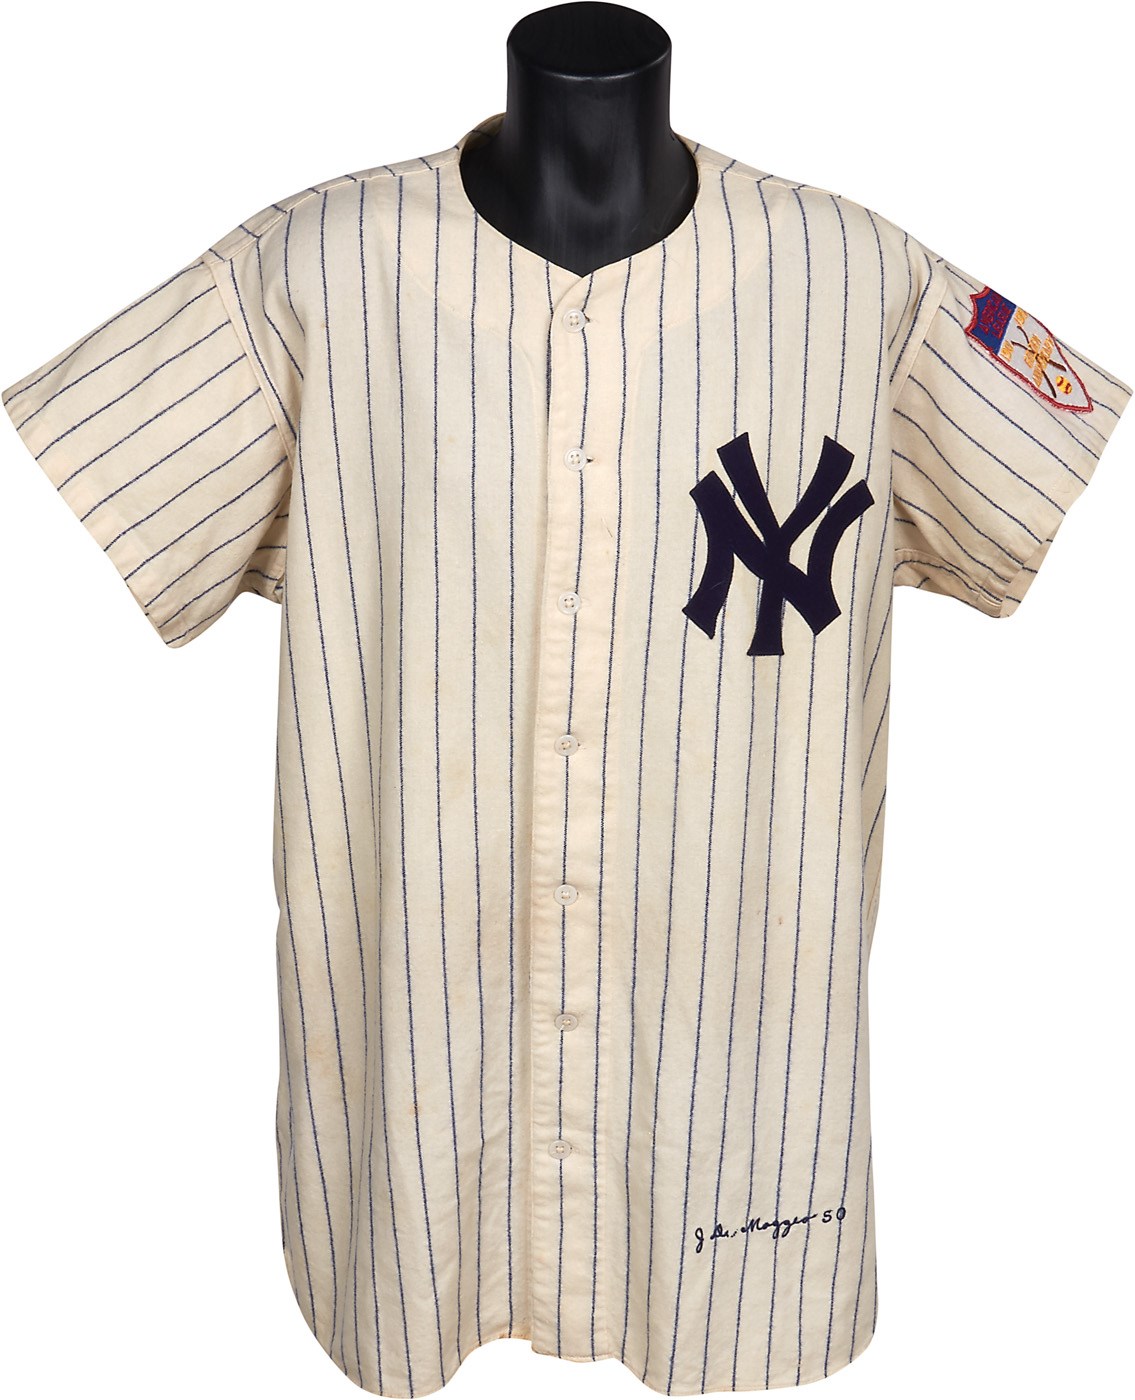 NY Yankees, Giants & Mets - 1950-51 Joe DiMaggio New York Yankees Game Worn Uniform - Photo-Matched (MEARS A8)